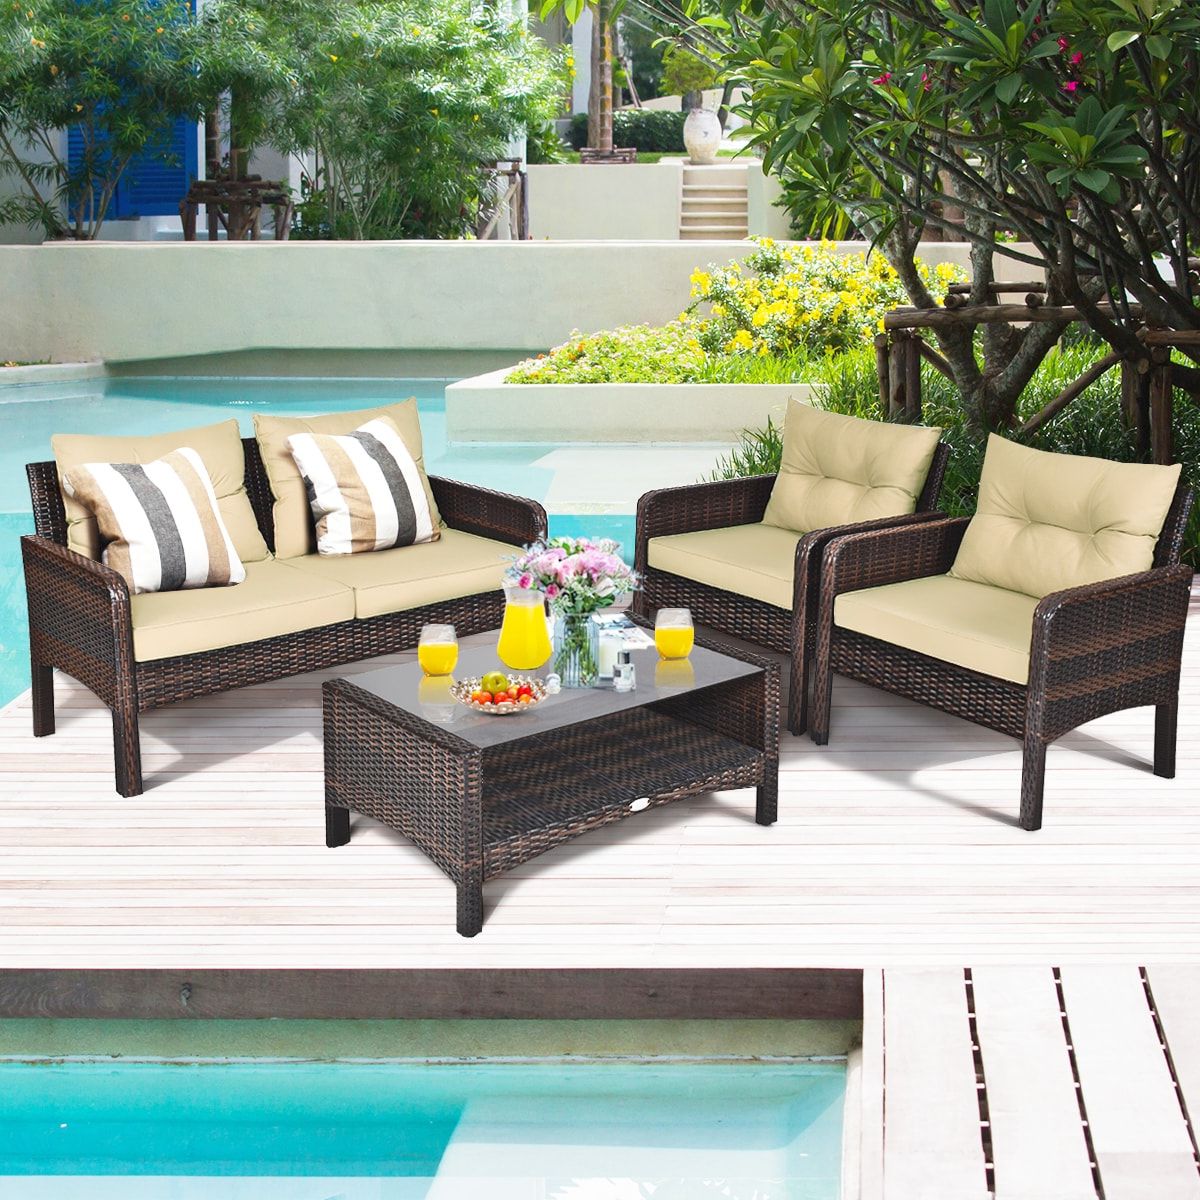 4 Piece Outdoor Wicker Seating Set In Brown Throughout 2019 Clihome Outdoor Rattan Furniture Set 4 Piece Rattan Patio Conversation Set  With Brown Cushions In The Patio Conversation Sets Department At Lowes (View 9 of 15)